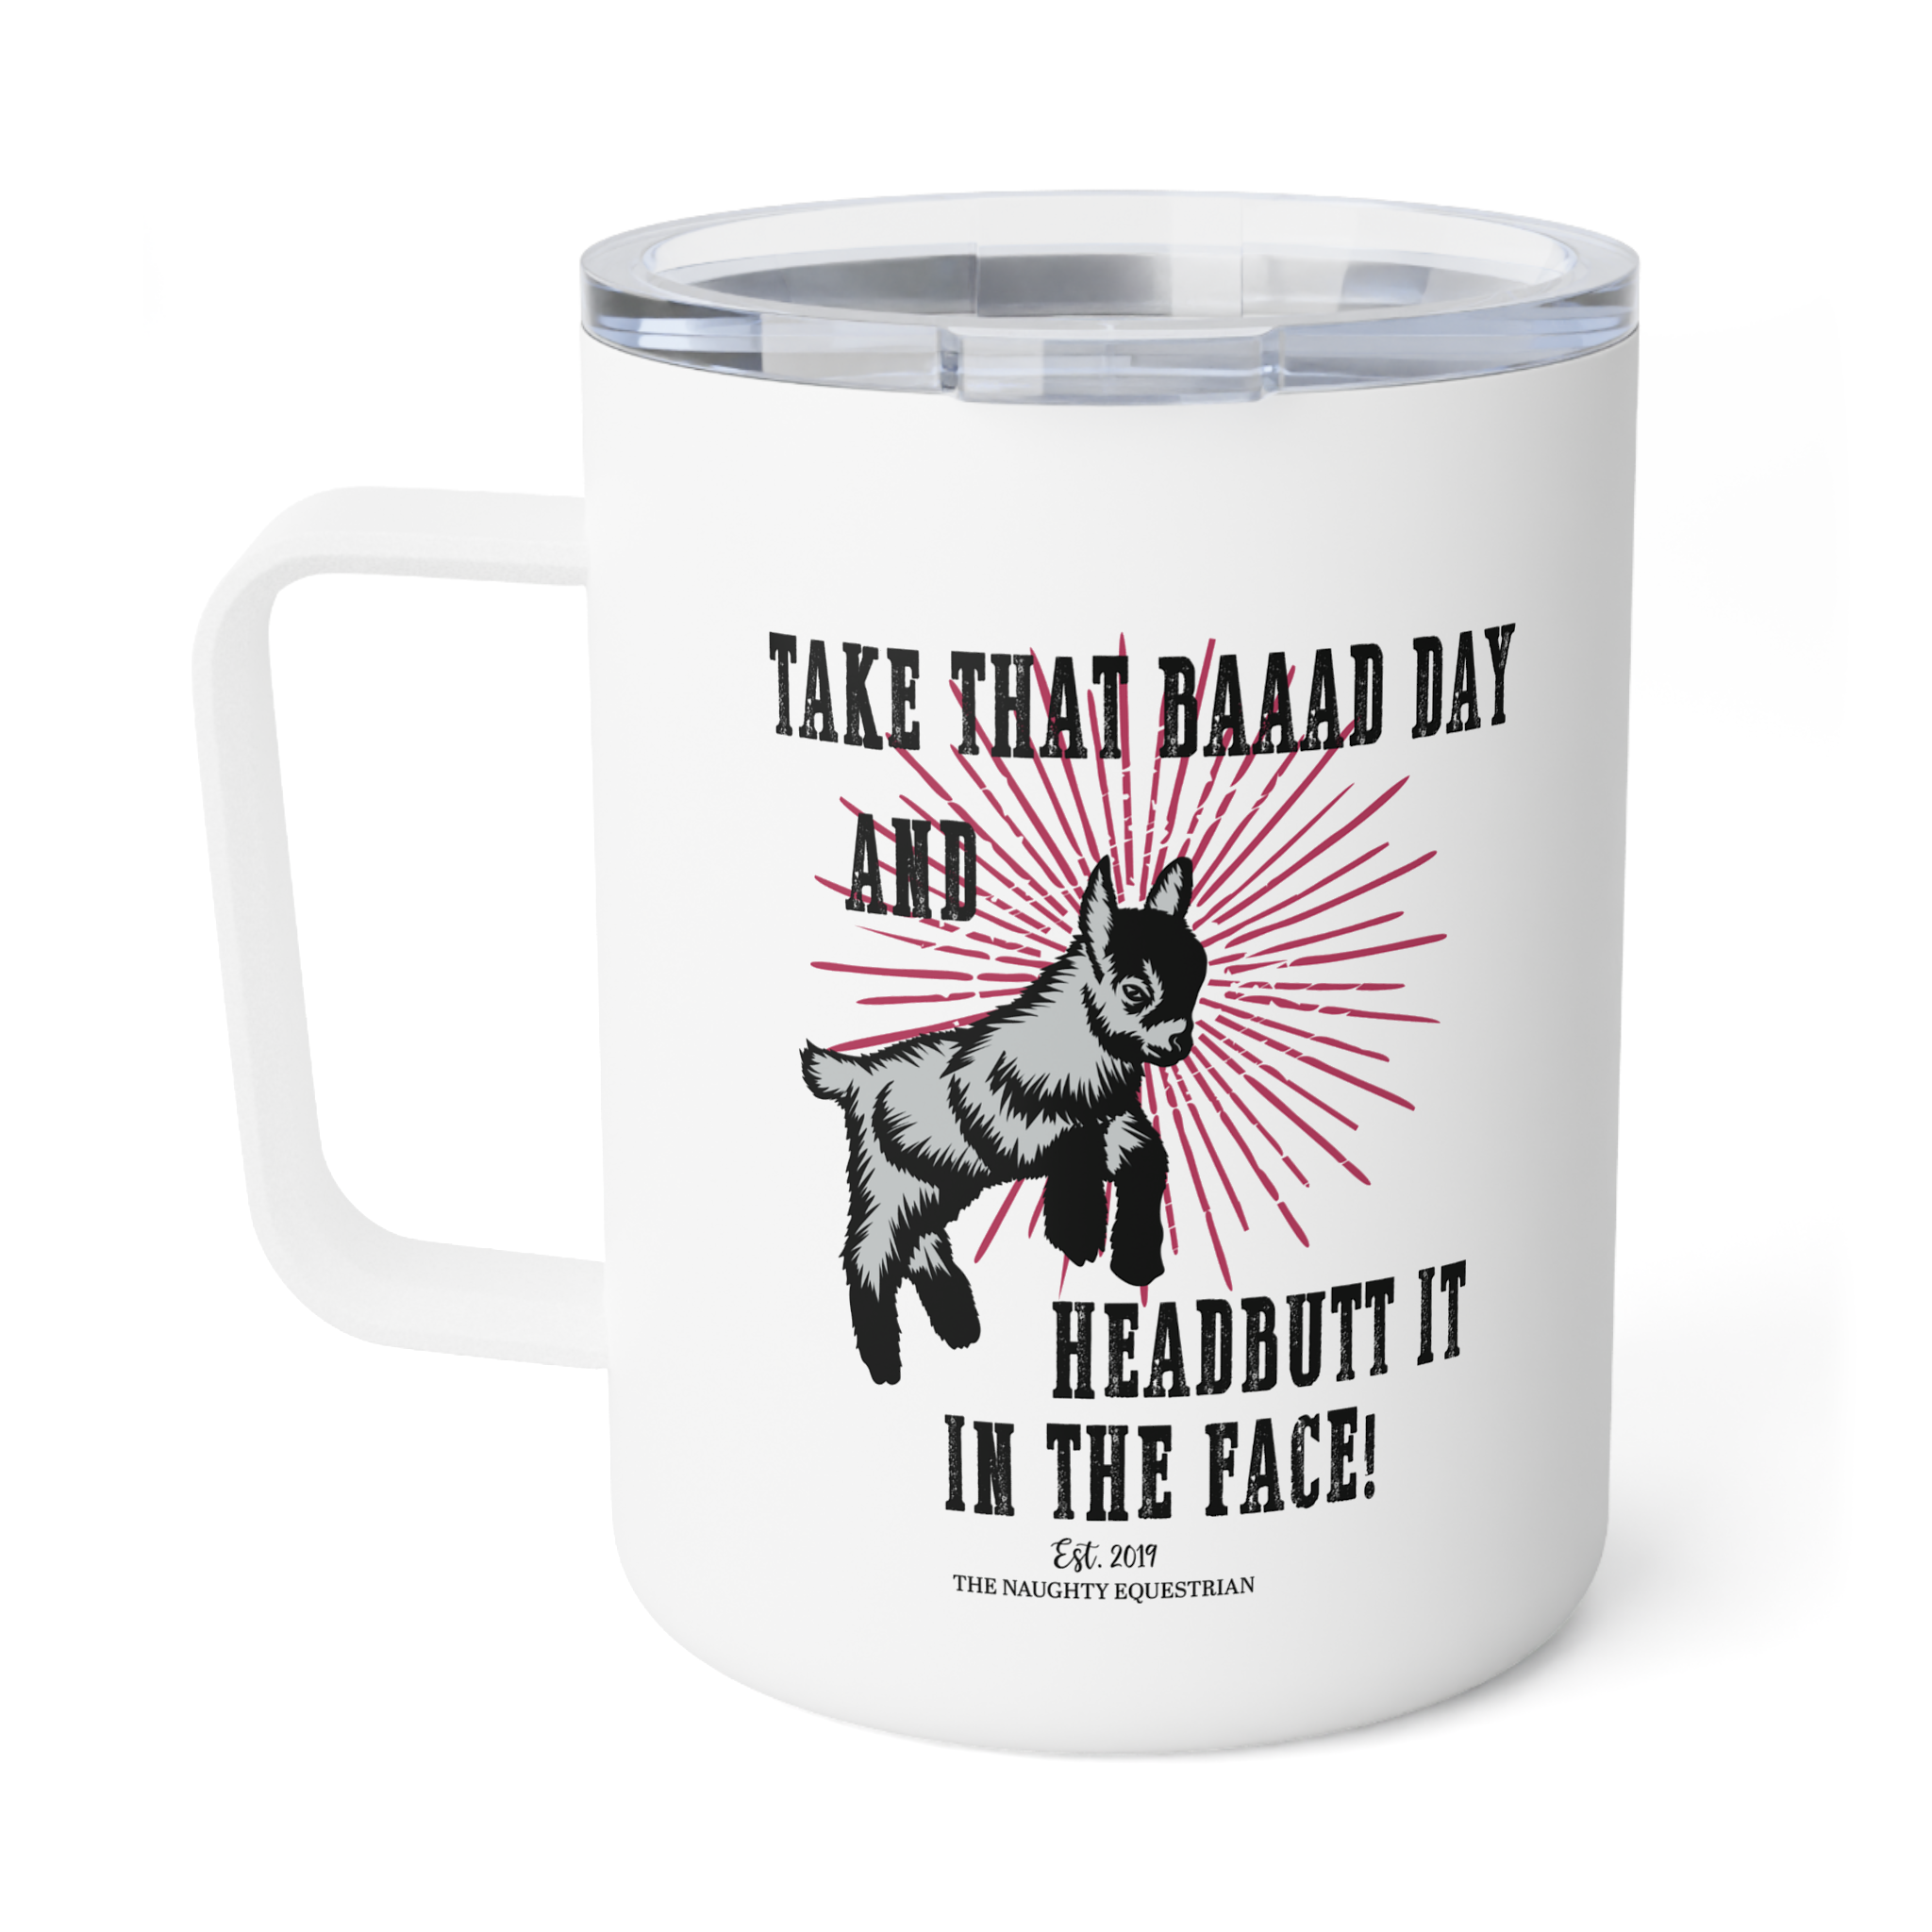 Take That Bad Day And Headbutt it Goat Western Mug, Camp Cup